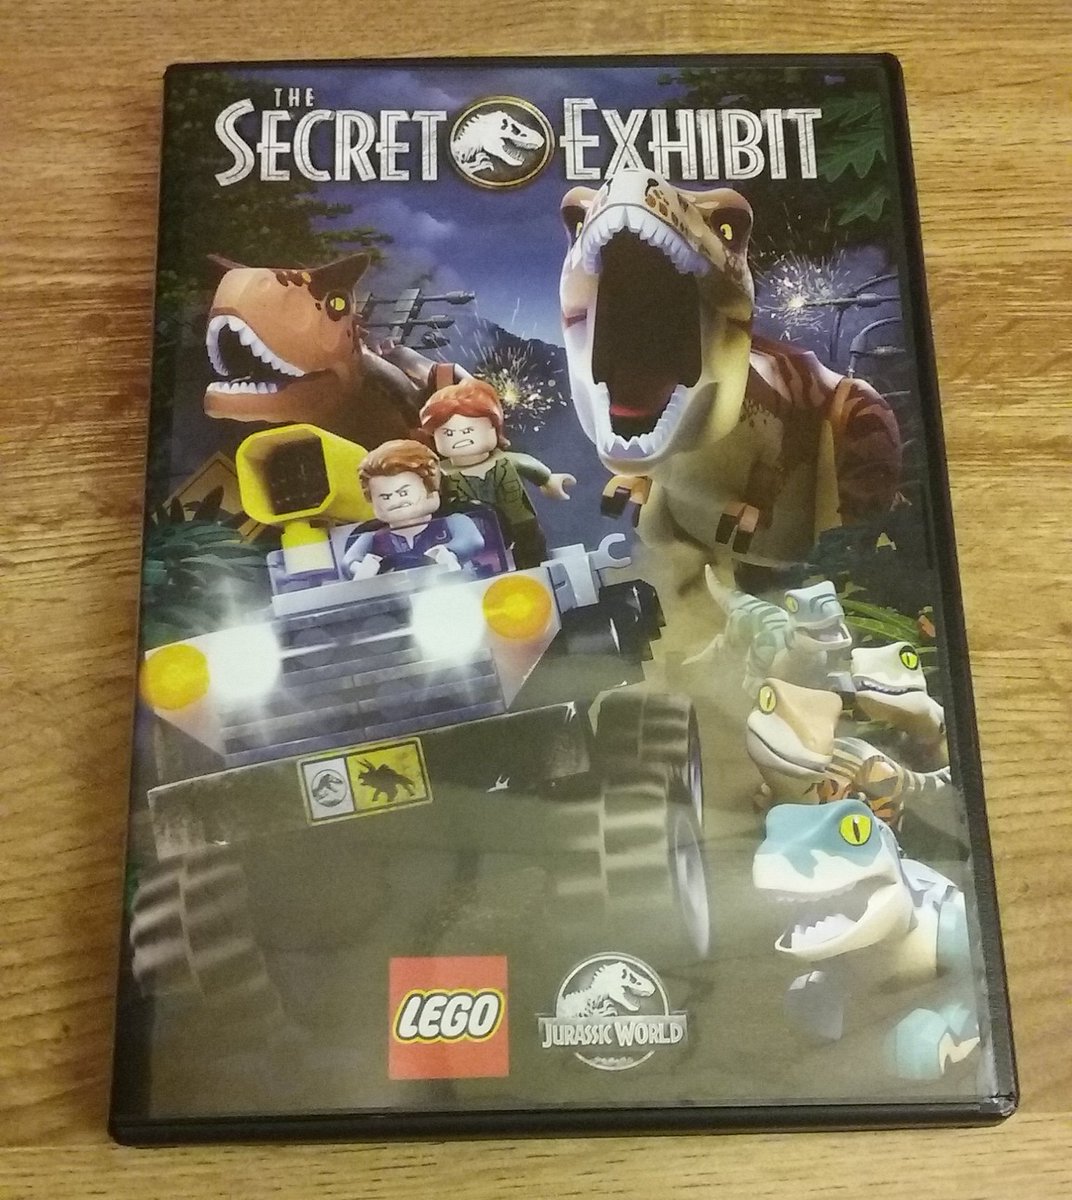 I was at Target earlier today and got the Lego Jurassic World: The Secret Exhibit dvd. #JurassicParkFan